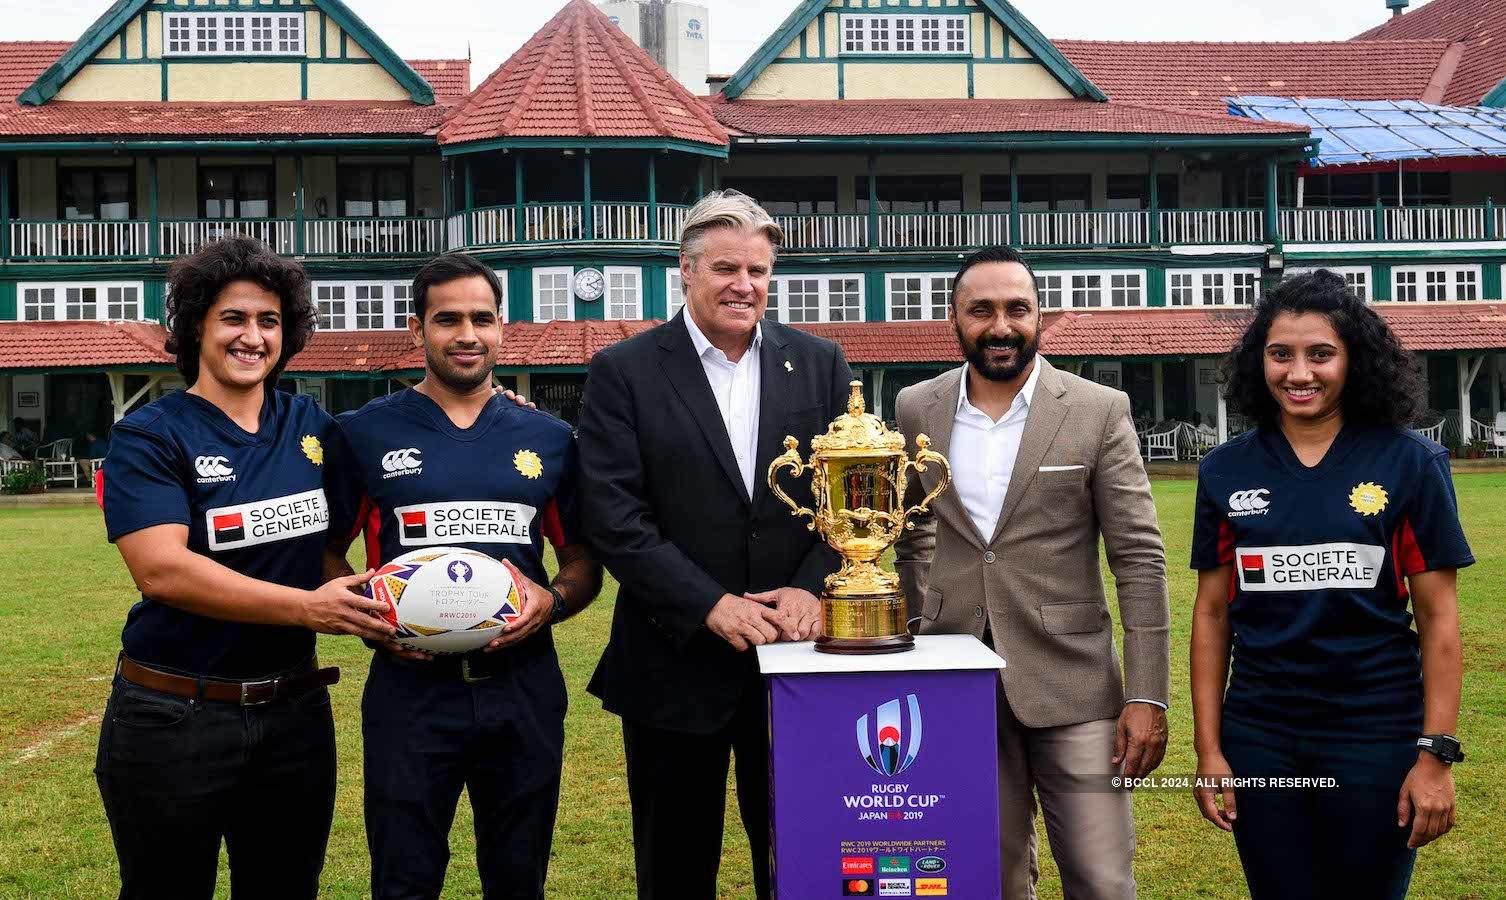 Sidharth Malhotra and Rahul Bose at Rugby World Cup 2019 Trophy Tour launch